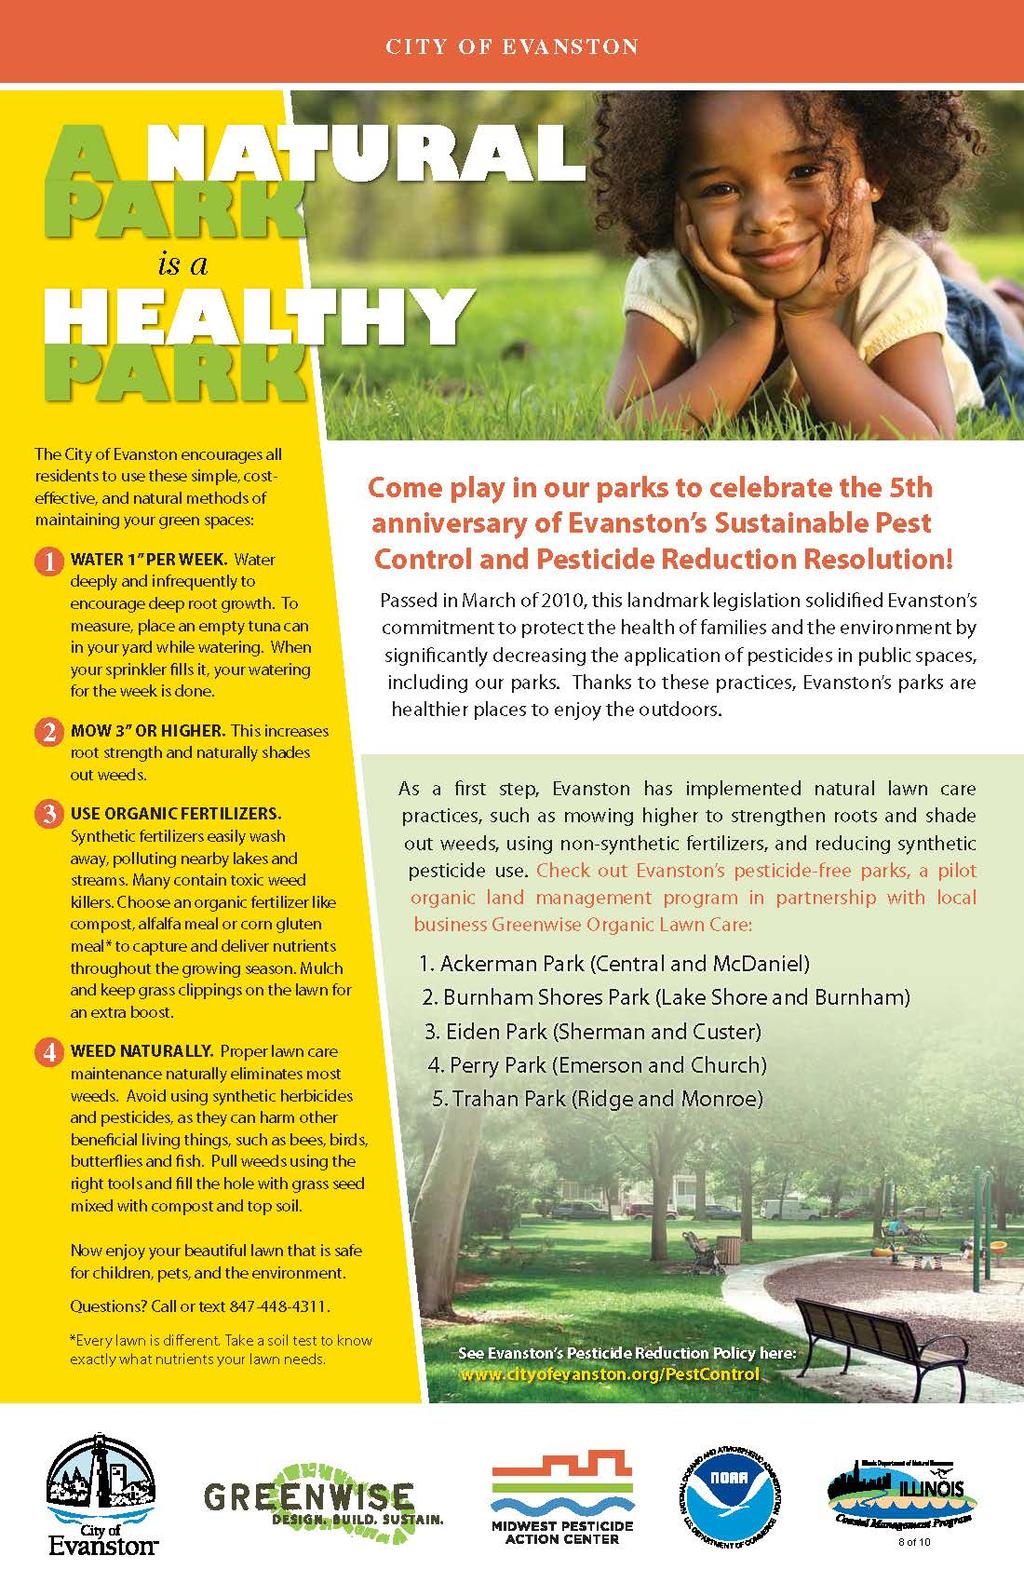 Sample Promotional Materials Spreading the word about your pesticide-free park can raise awareness in your community and